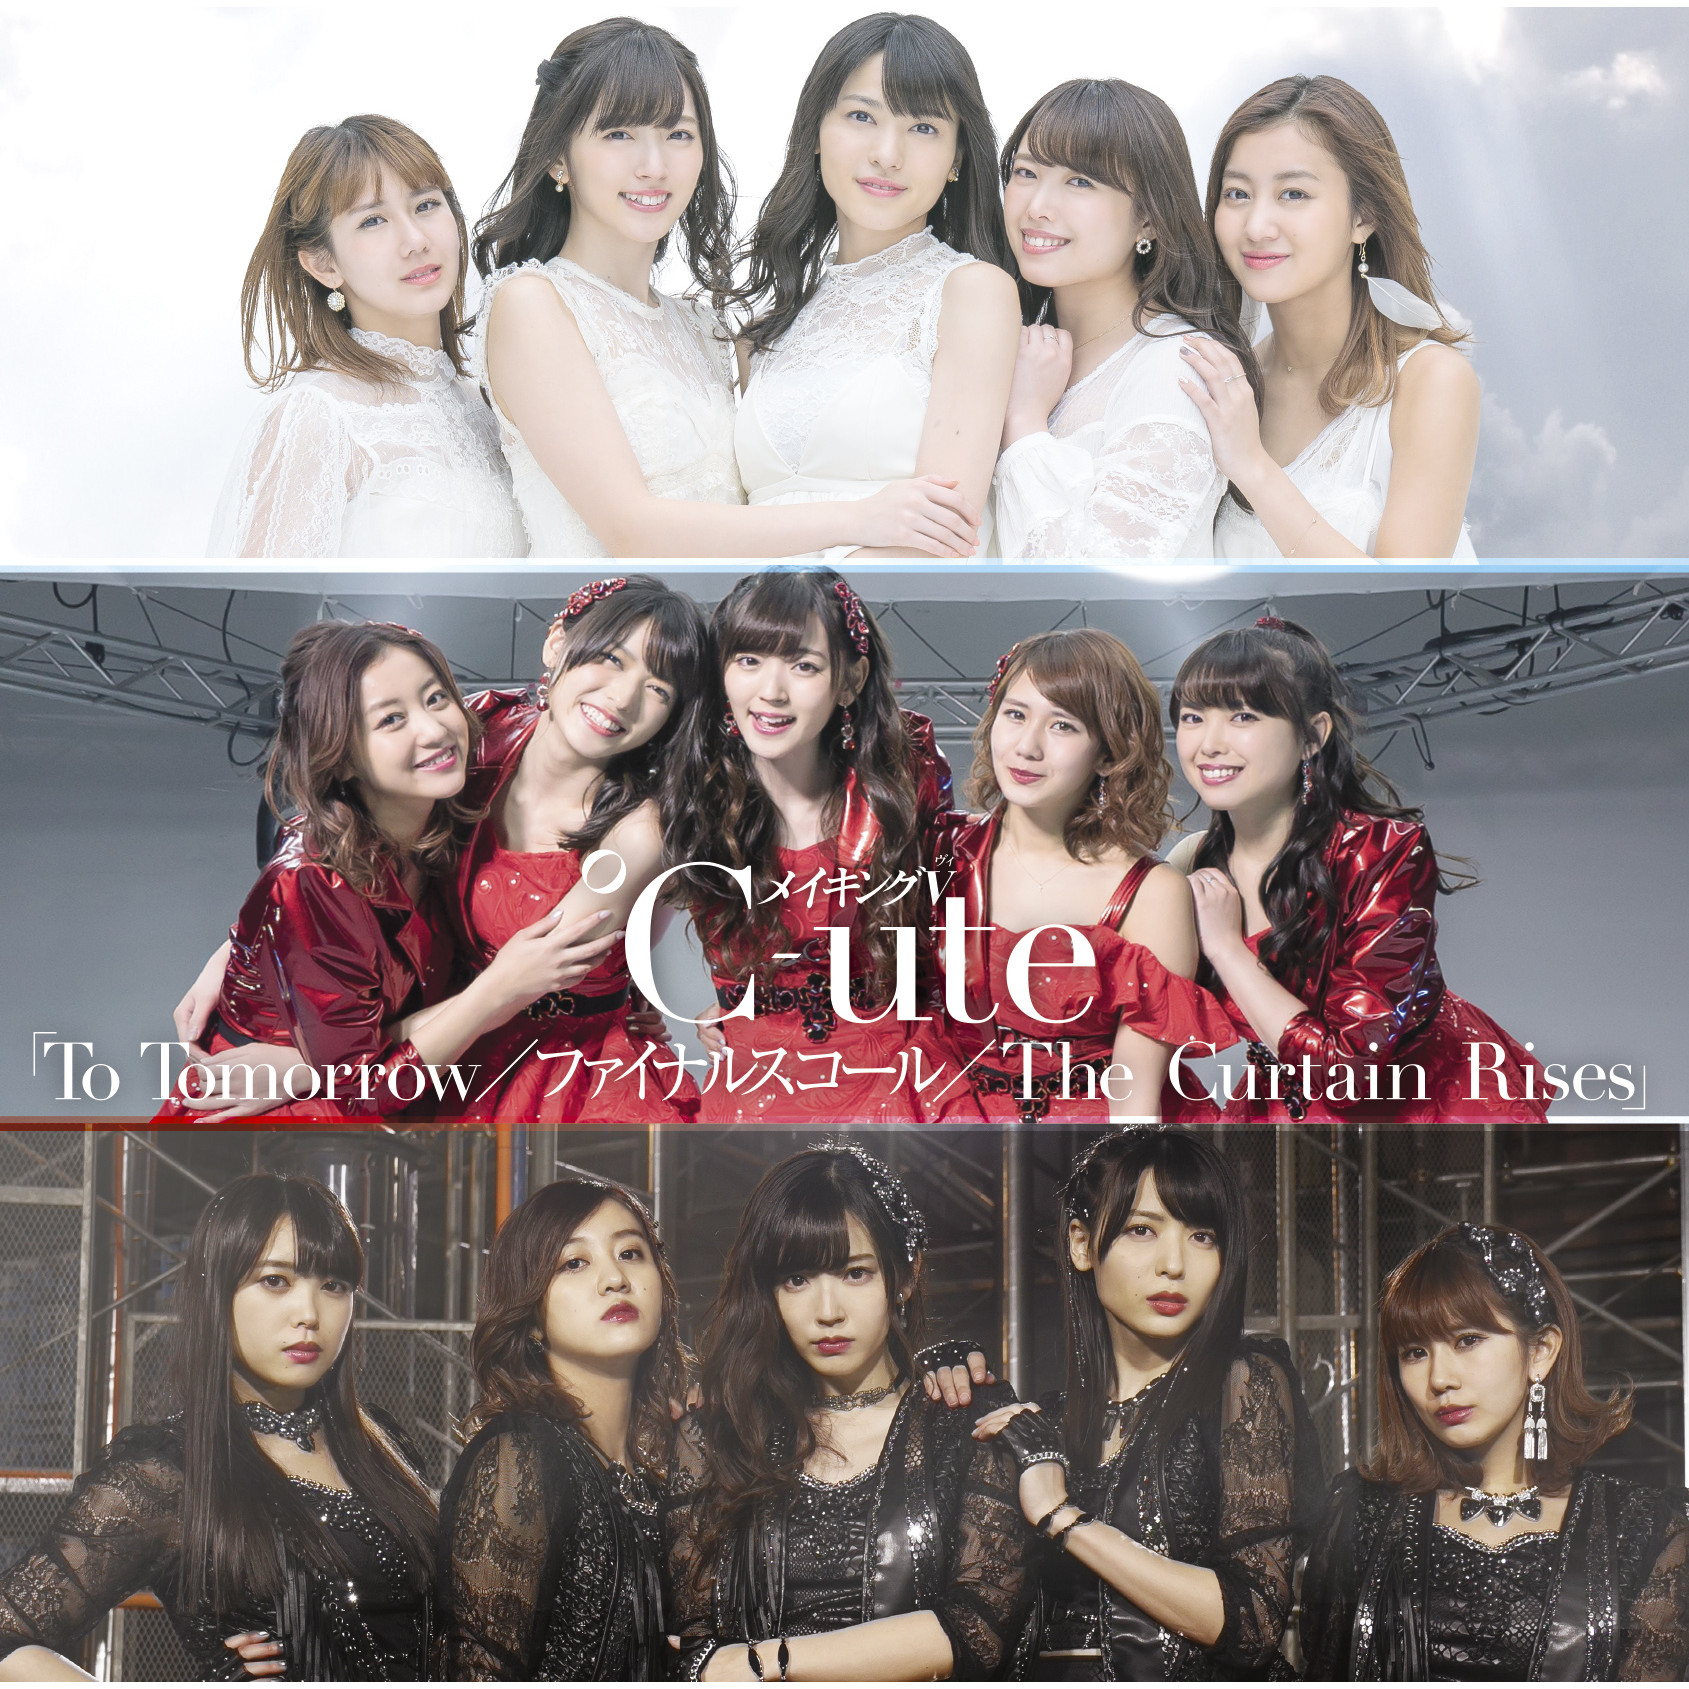 ℃-ute メイキングV「To Tomorrow／ファイナルスコール／The Curtain Rises」